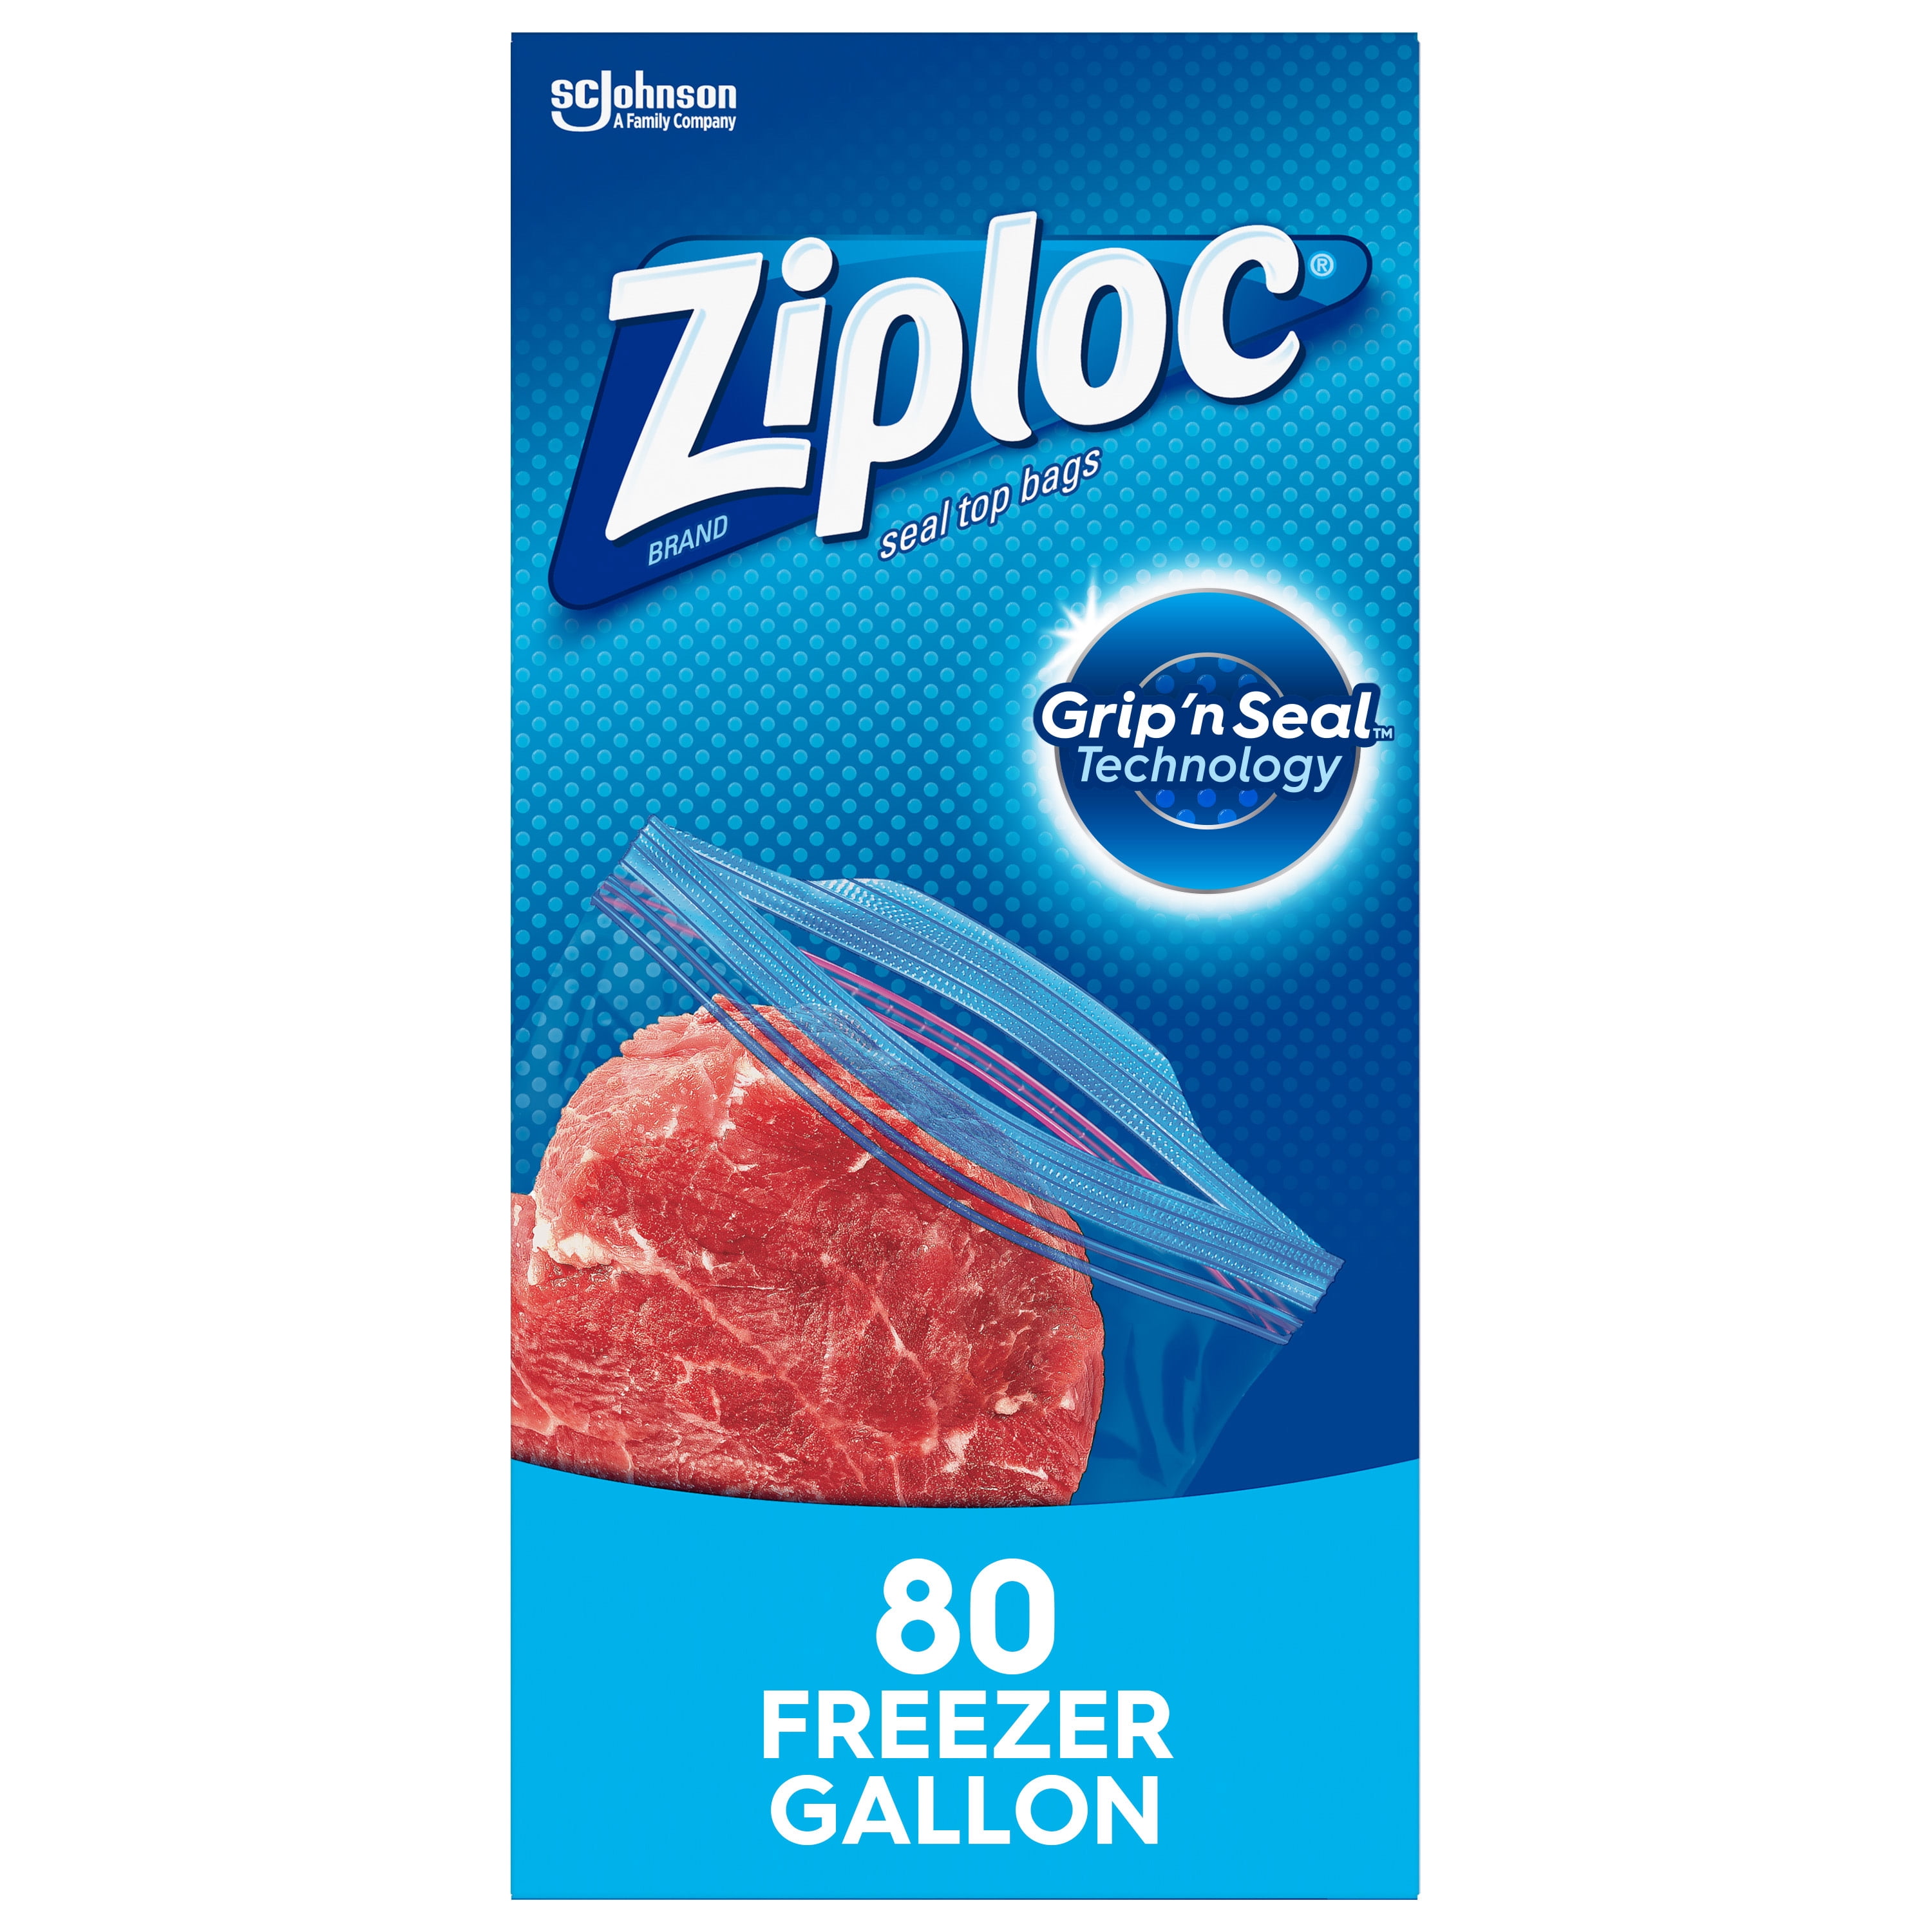 Ziploc Gallon Freezer Bags with New Grip n Seal Technology 80 Count Pack of 1 